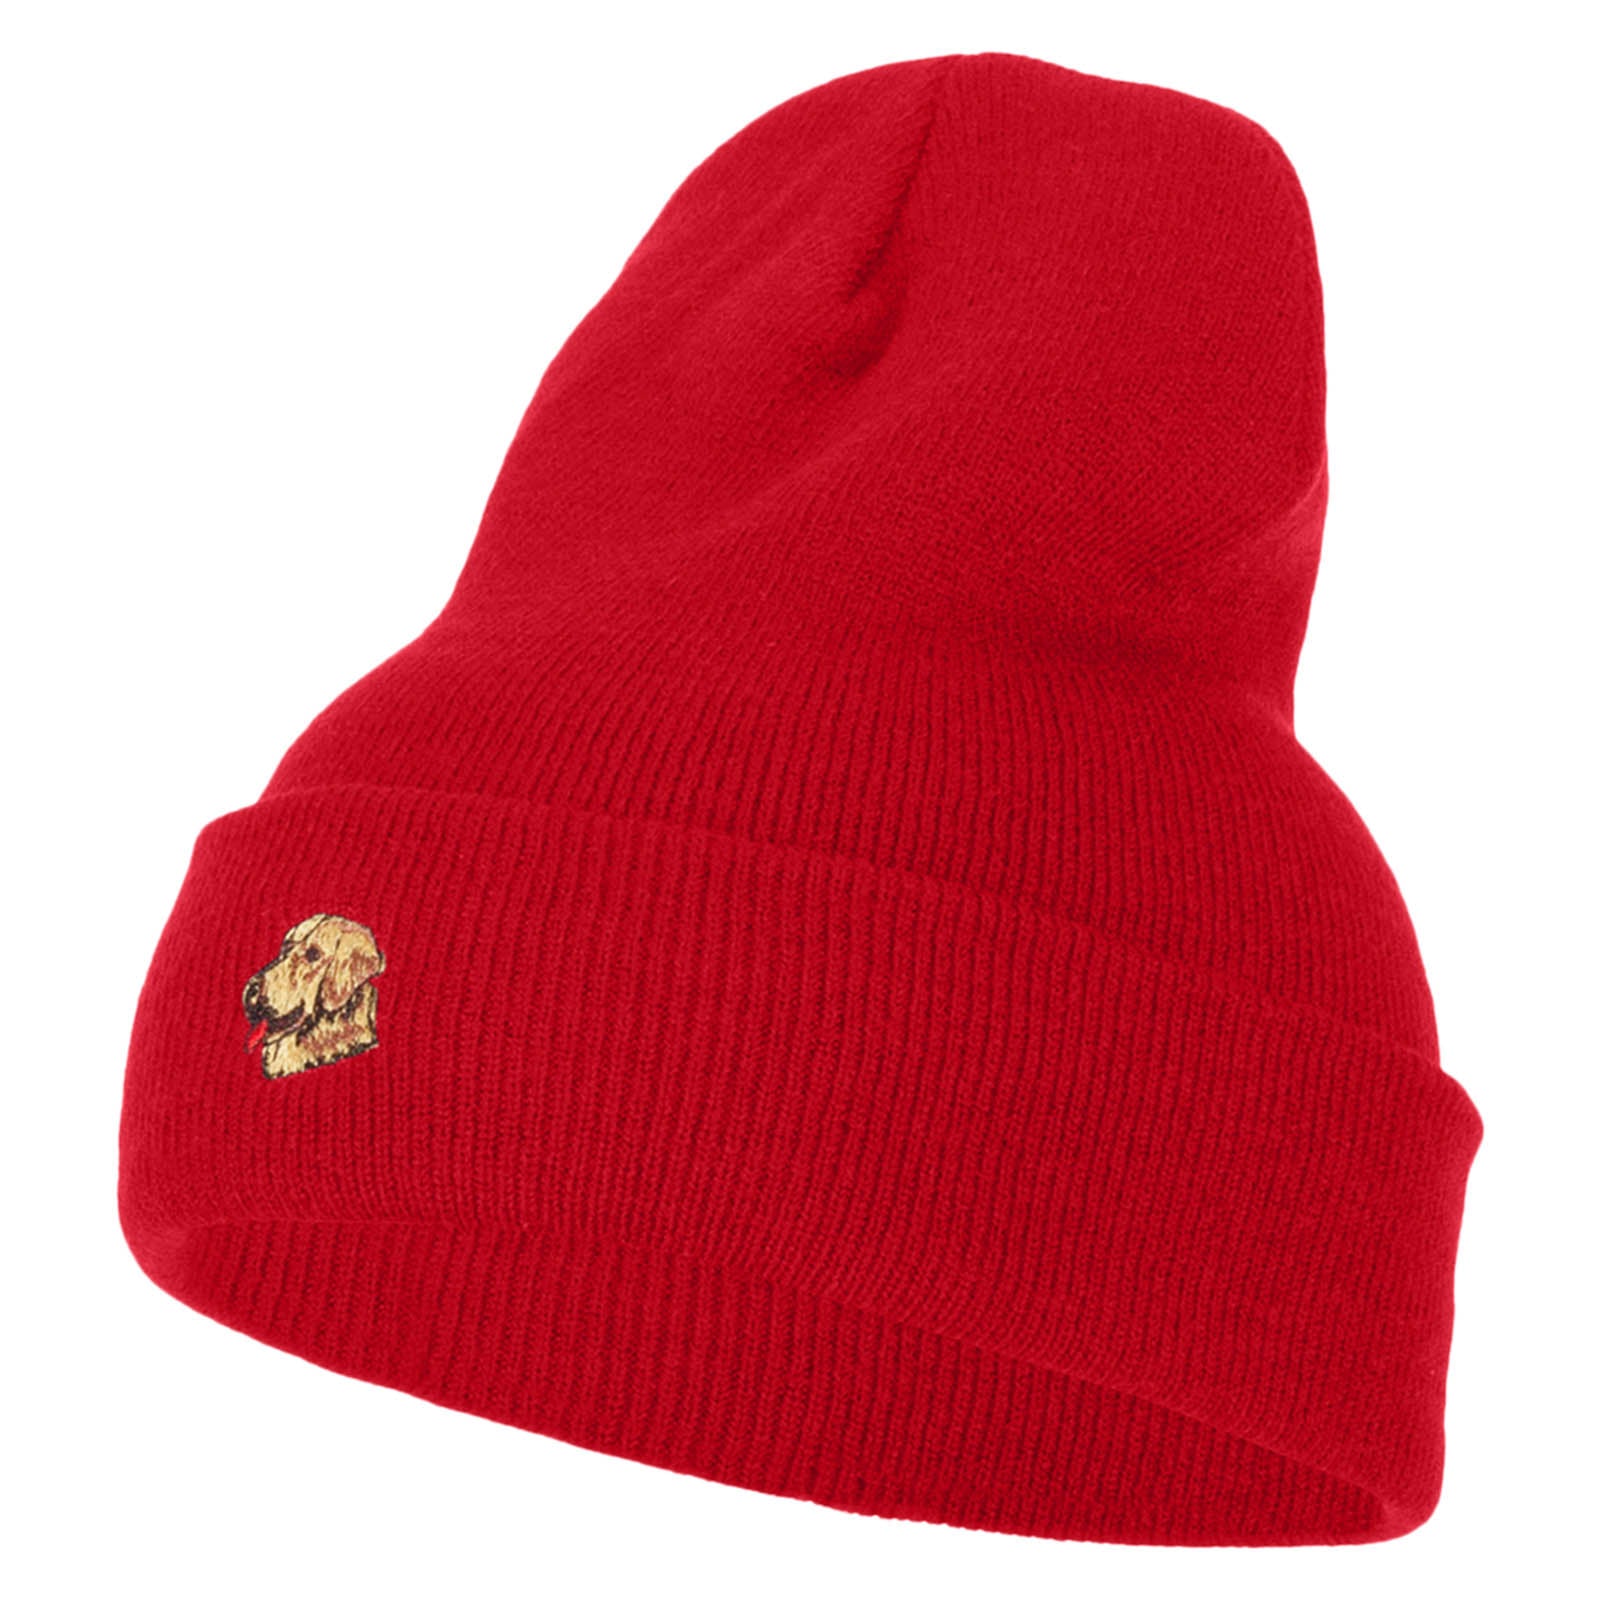 Golden Retriever Head Embroidered Long Knitted Beanie - Red OSFM